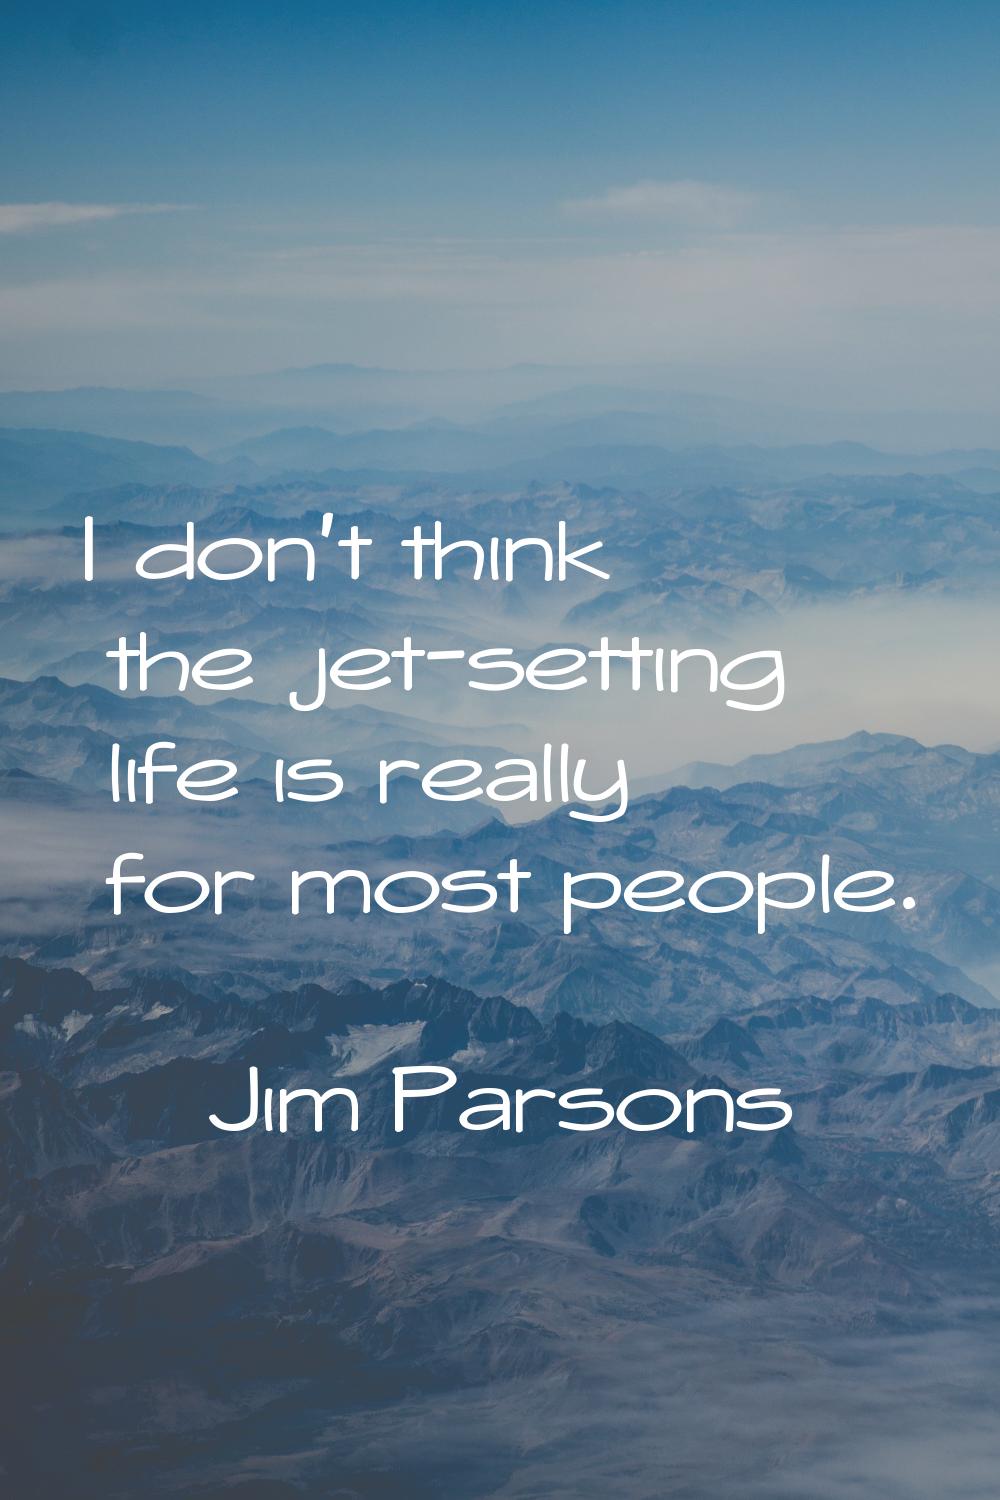 I don't think the jet-setting life is really for most people.